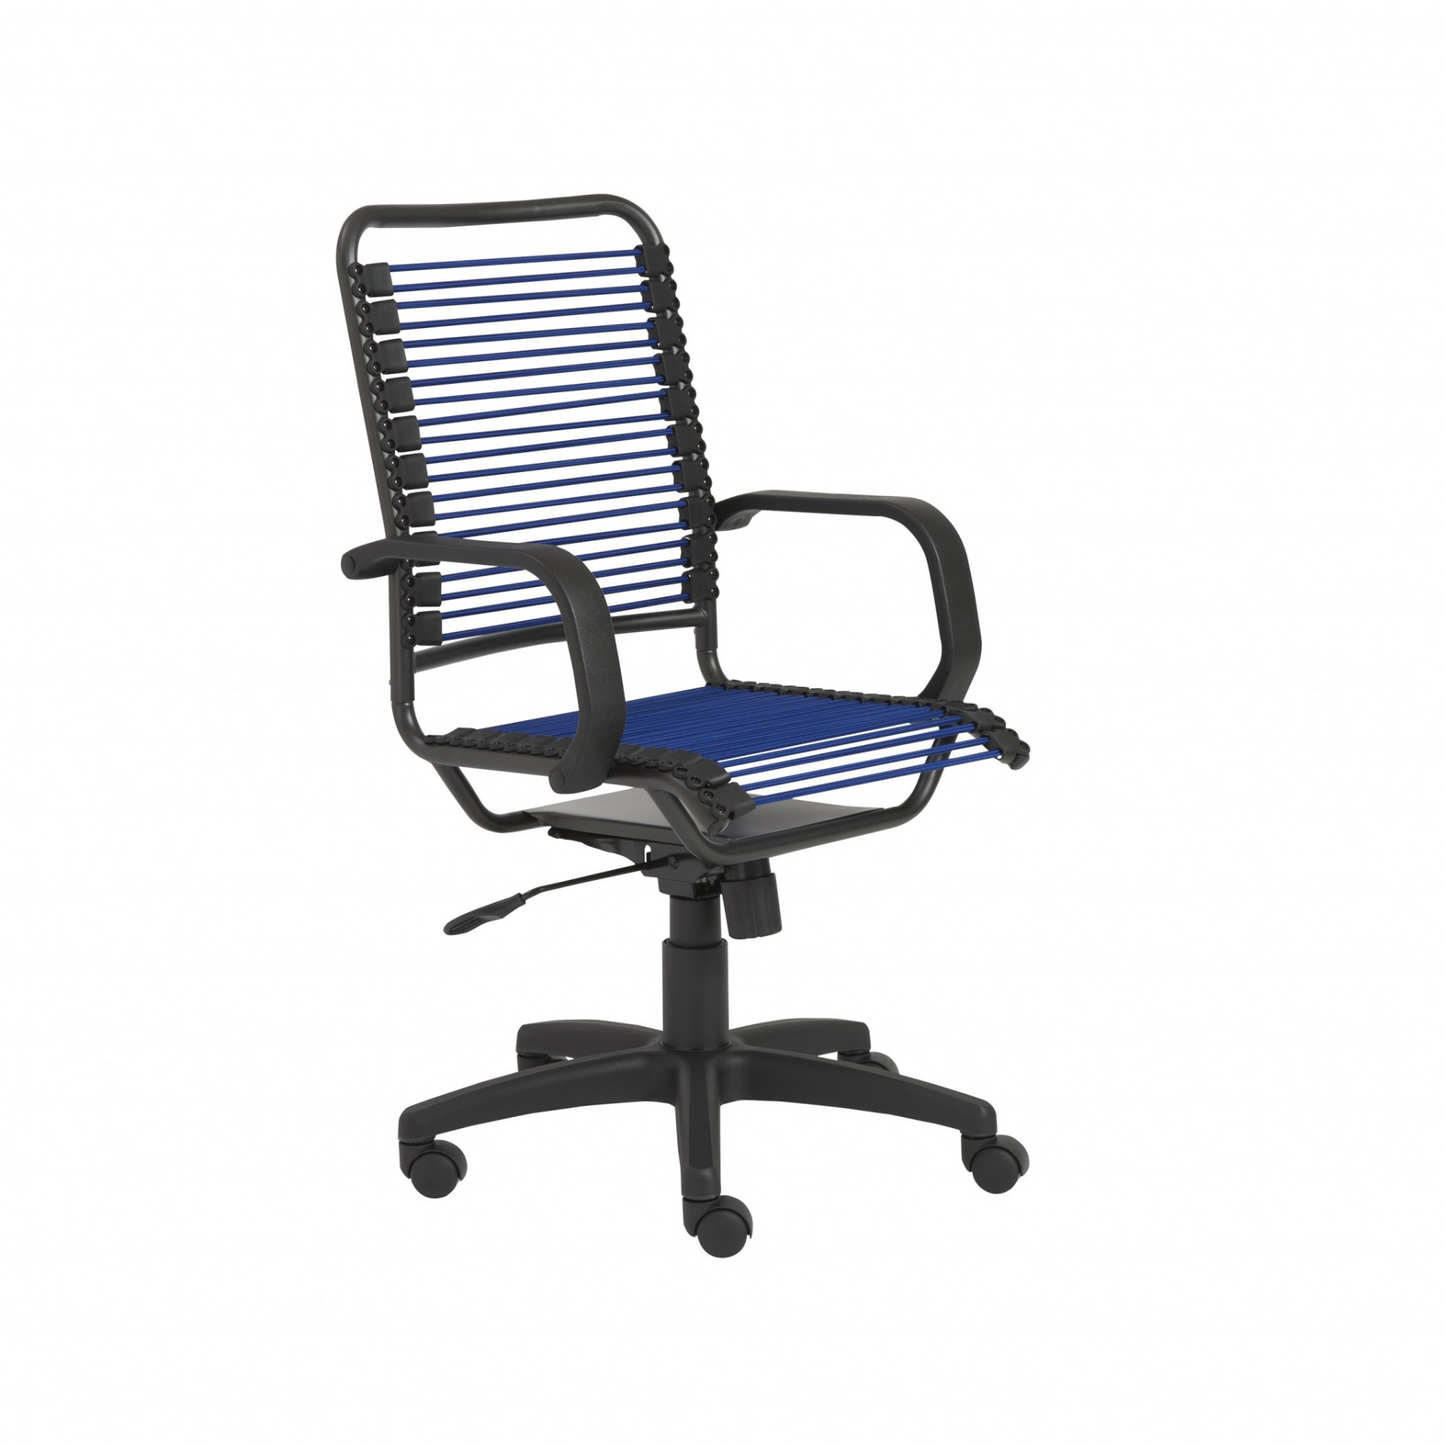 43" Black and Blue Round Bungee Cord High Back Office Chair